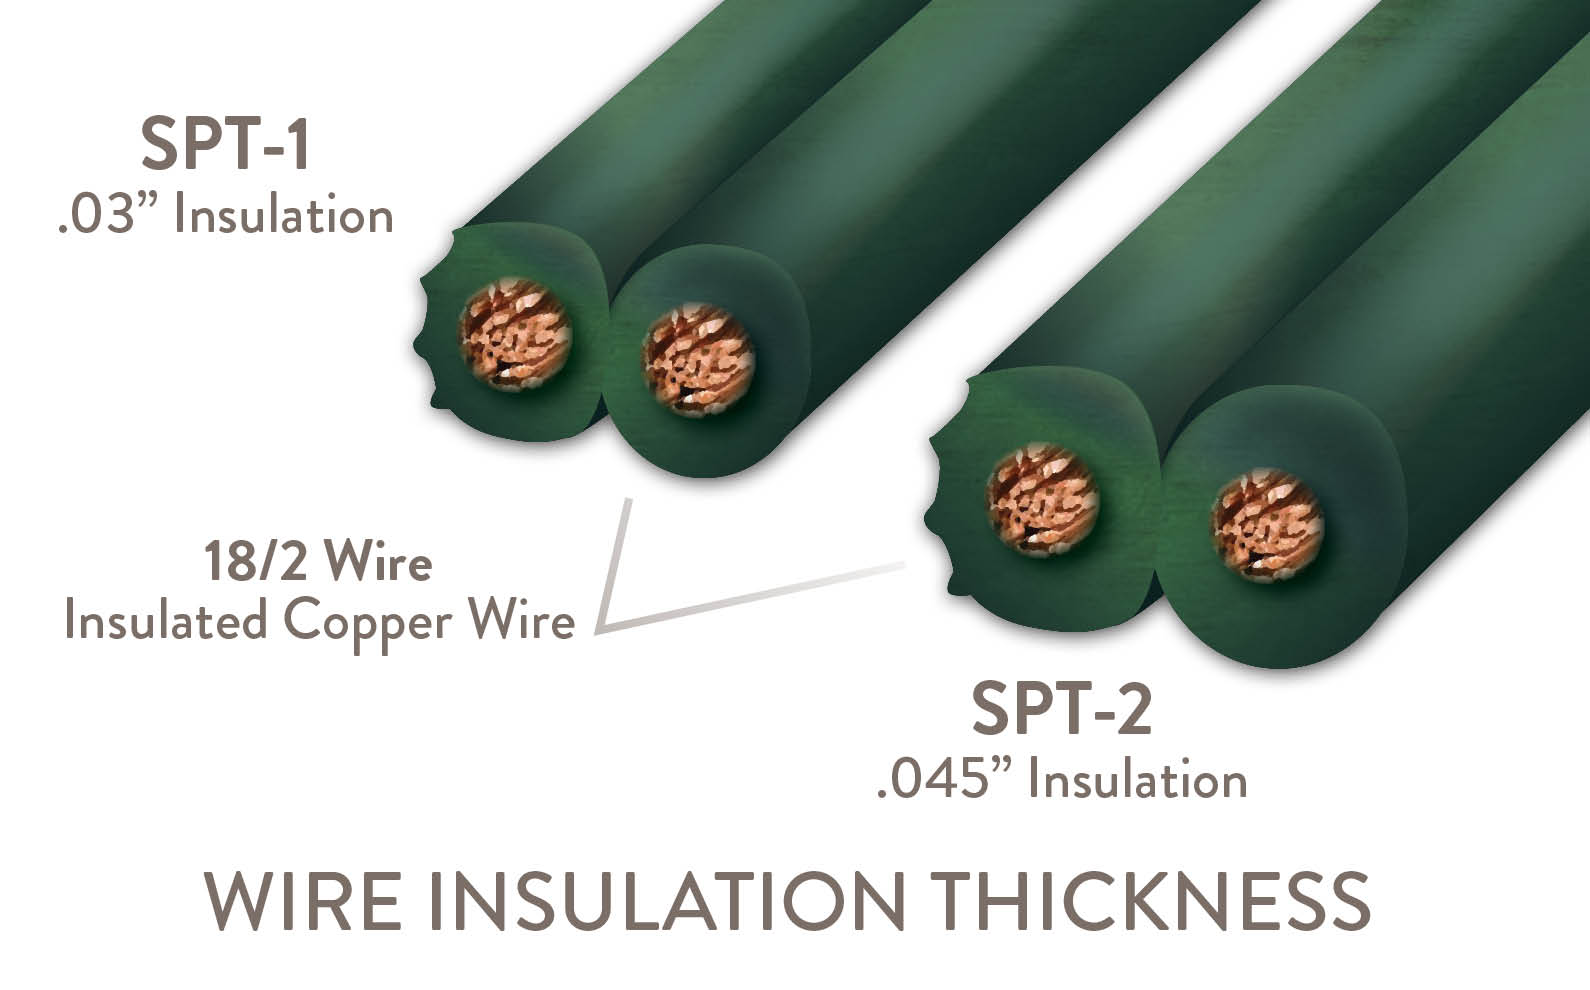 What is the Difference Between SPT-1 and SPT-2 Wire